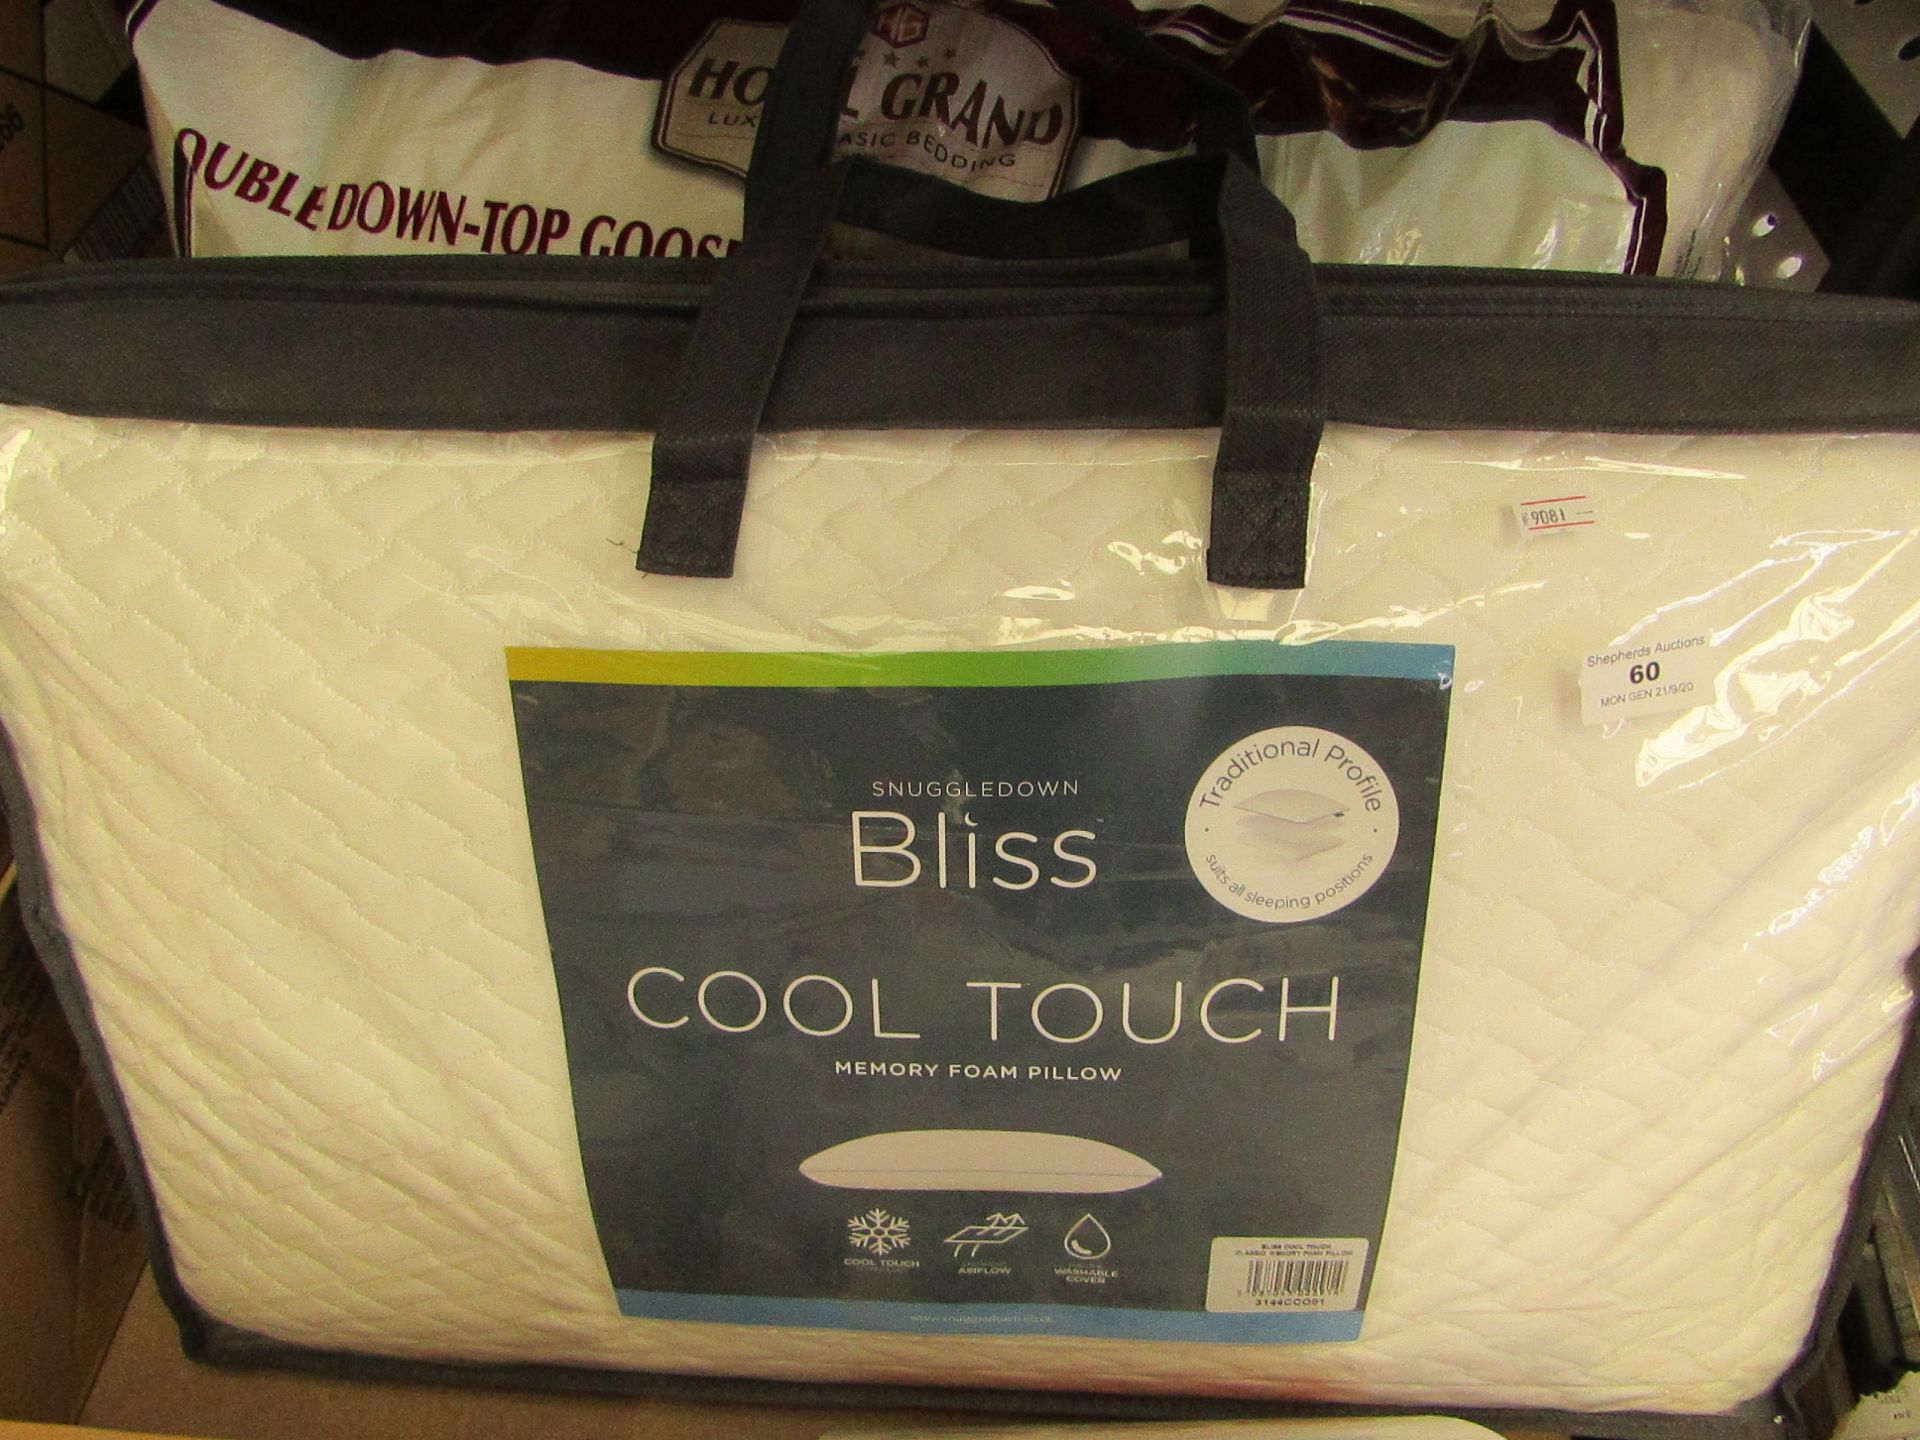 Snuggledown Bliss Cool Touch Memory Foam Pillow. Comes in a carry bag